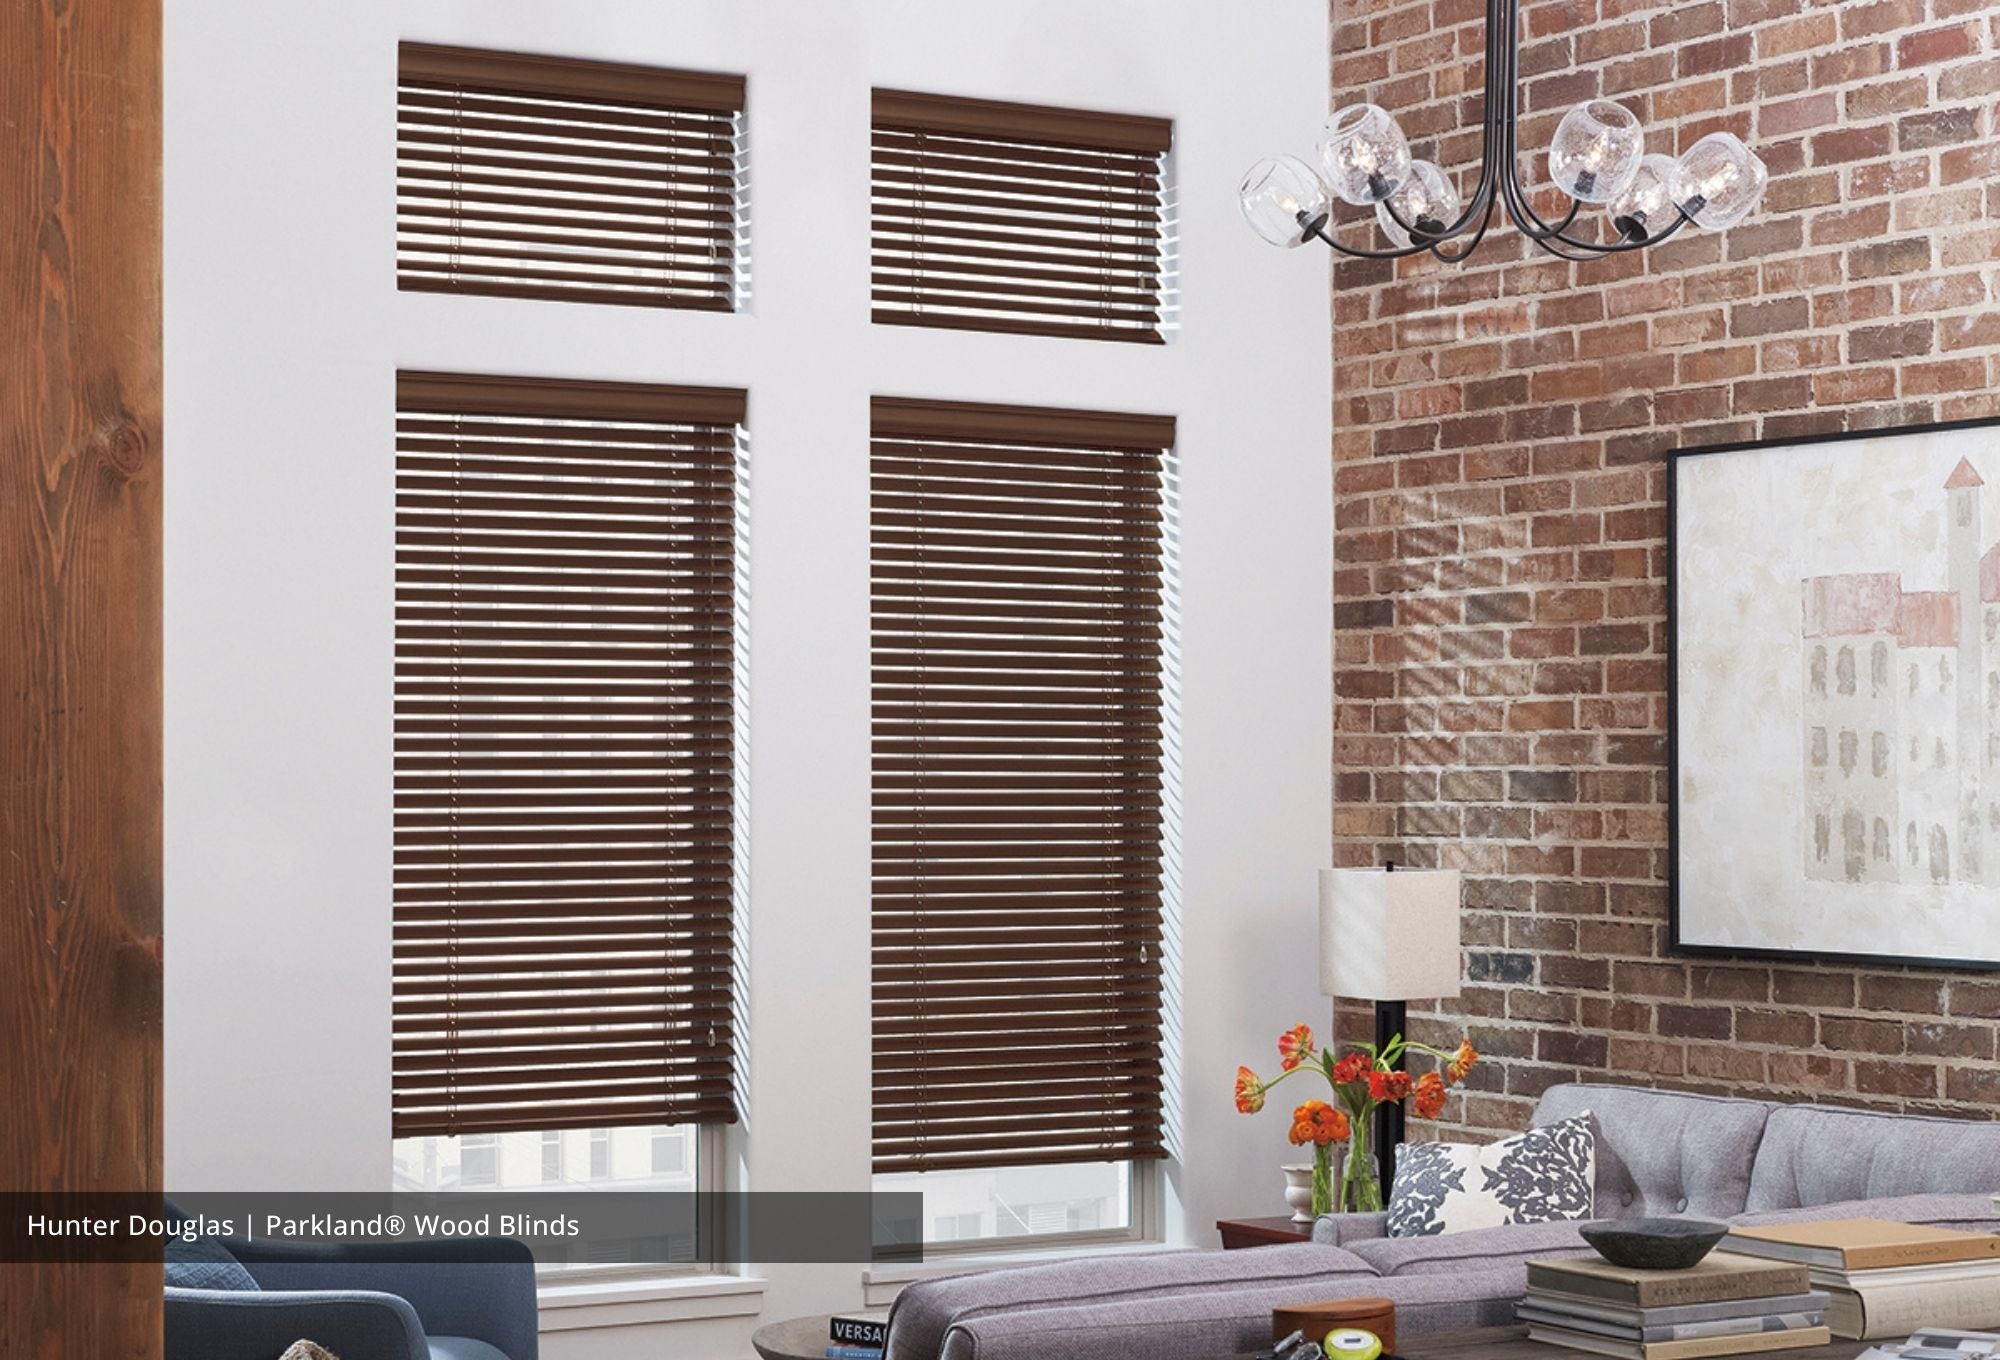 Hunter Douglas Wood Blinds available at JC Licht